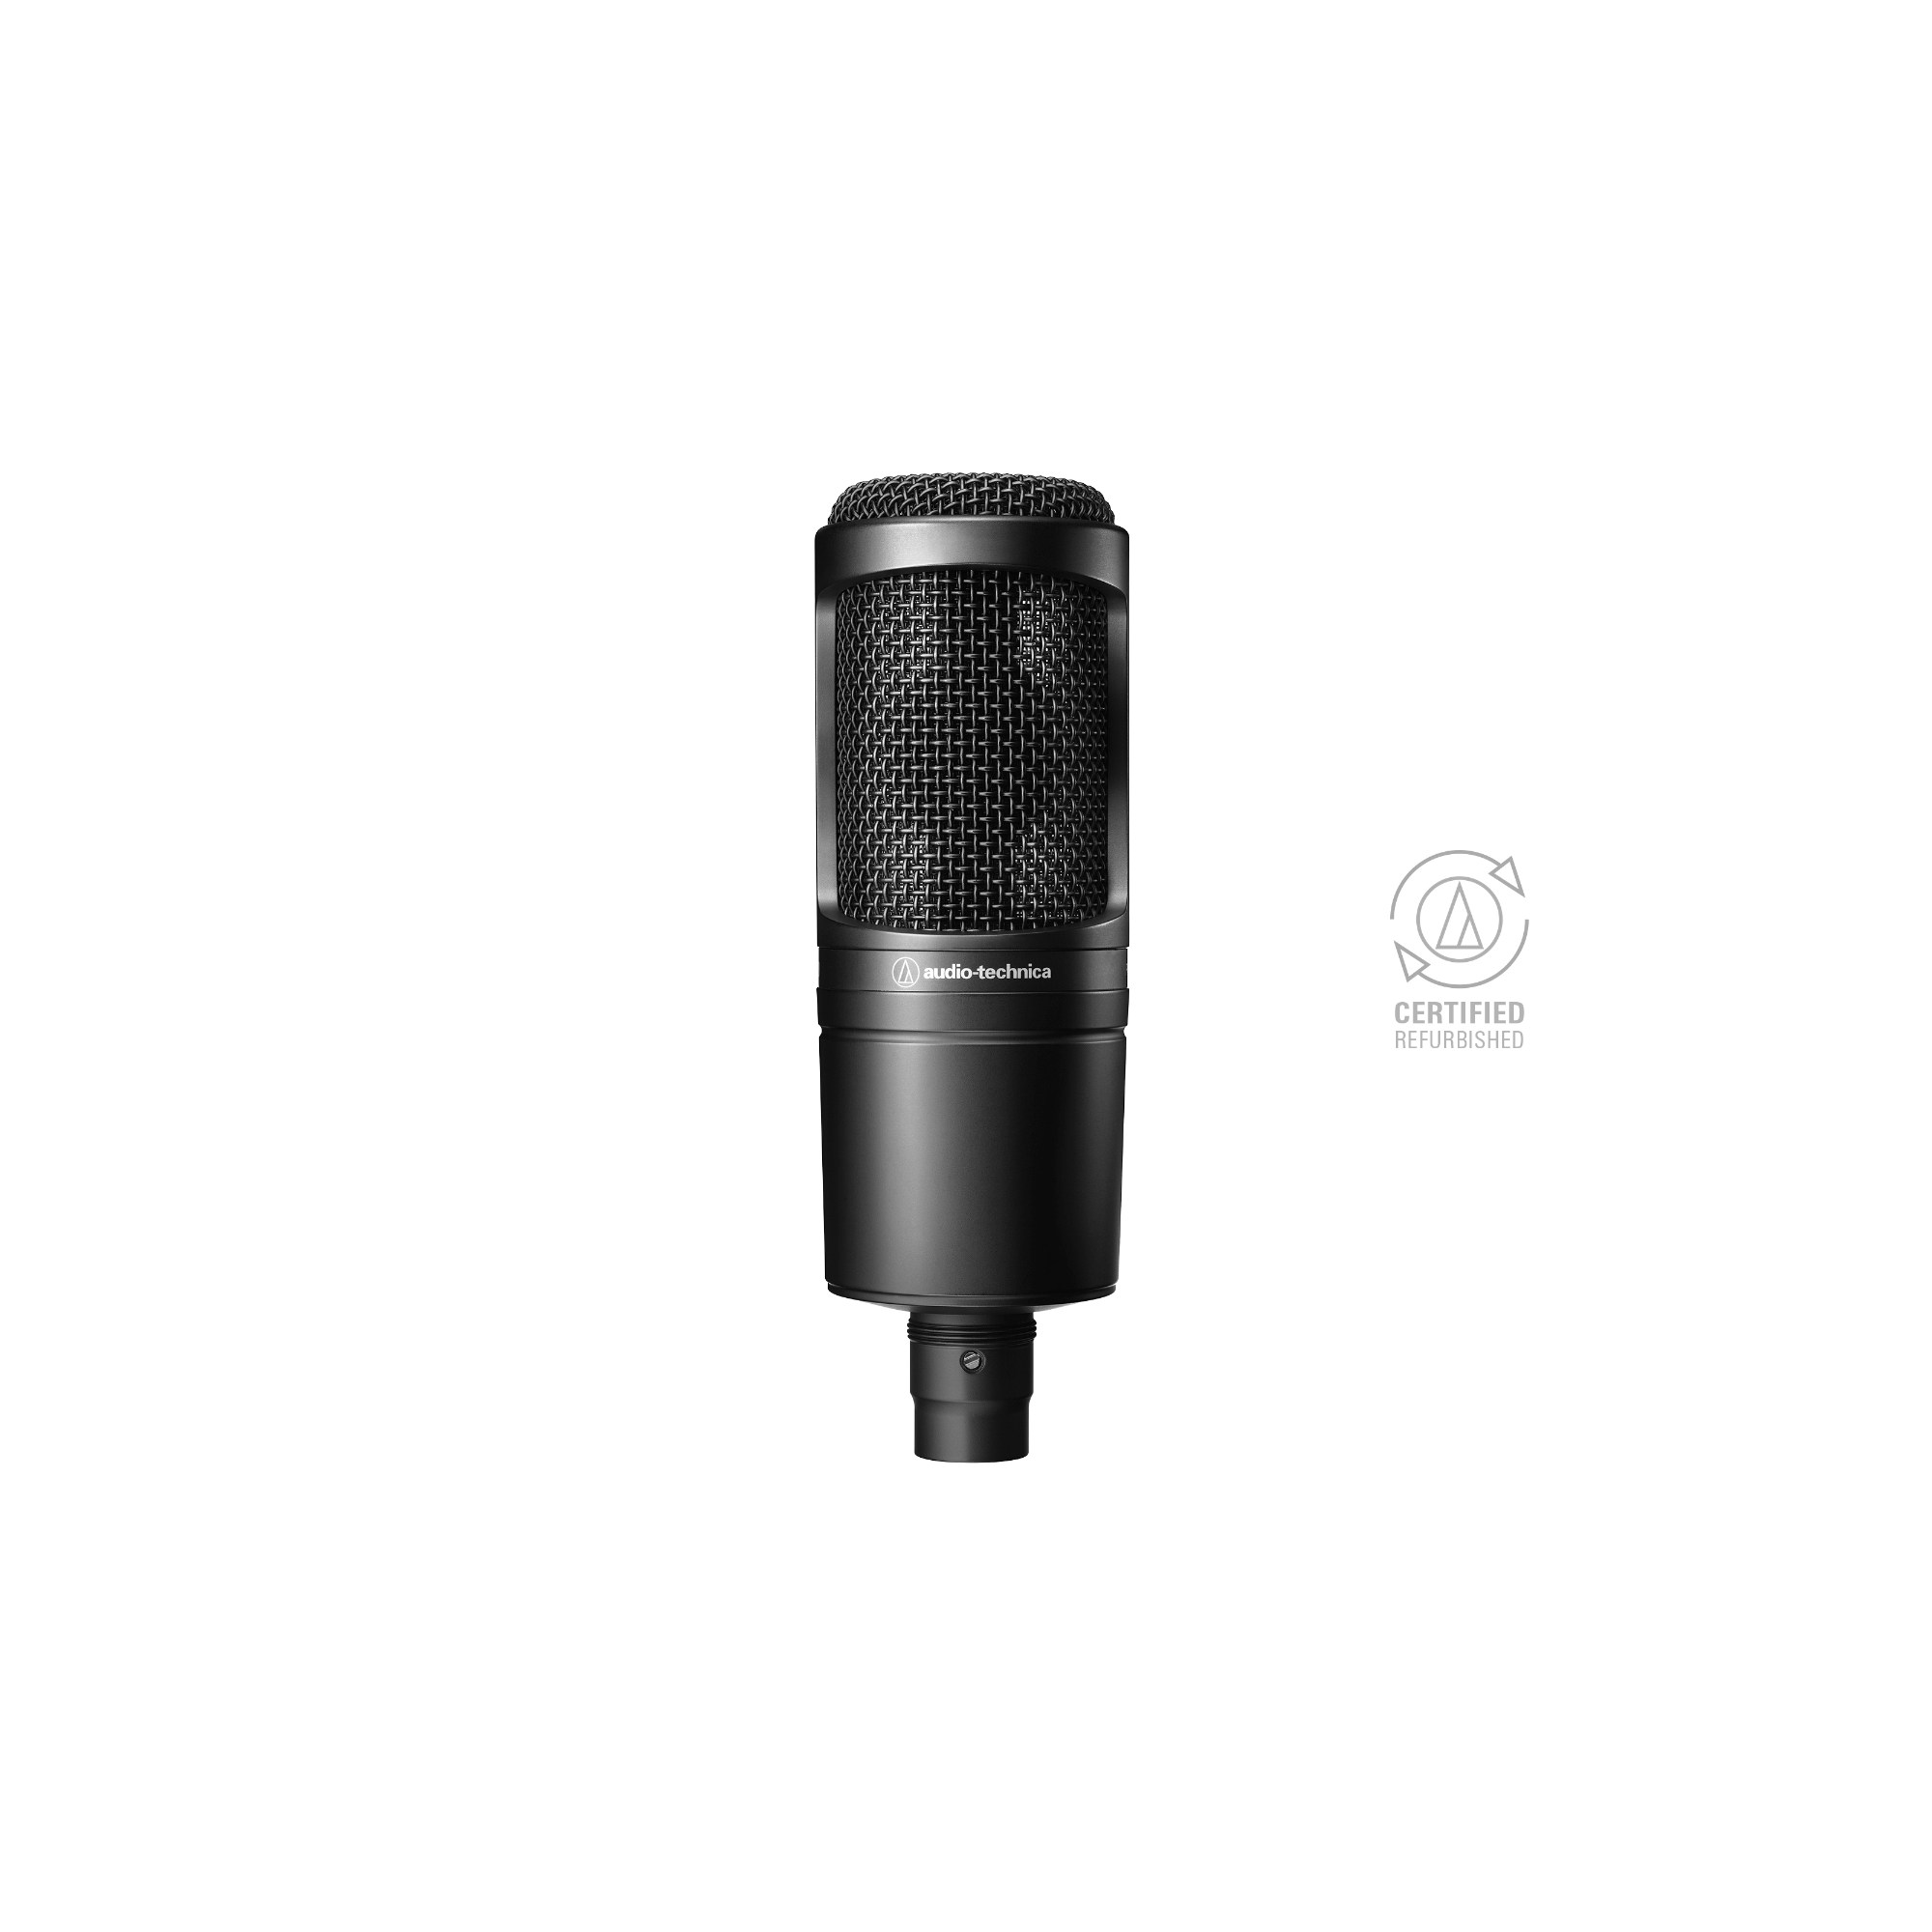 Audio Technica's AT2020 Cardioid Microphone Is a Great Way to Begin  Recording Sessions